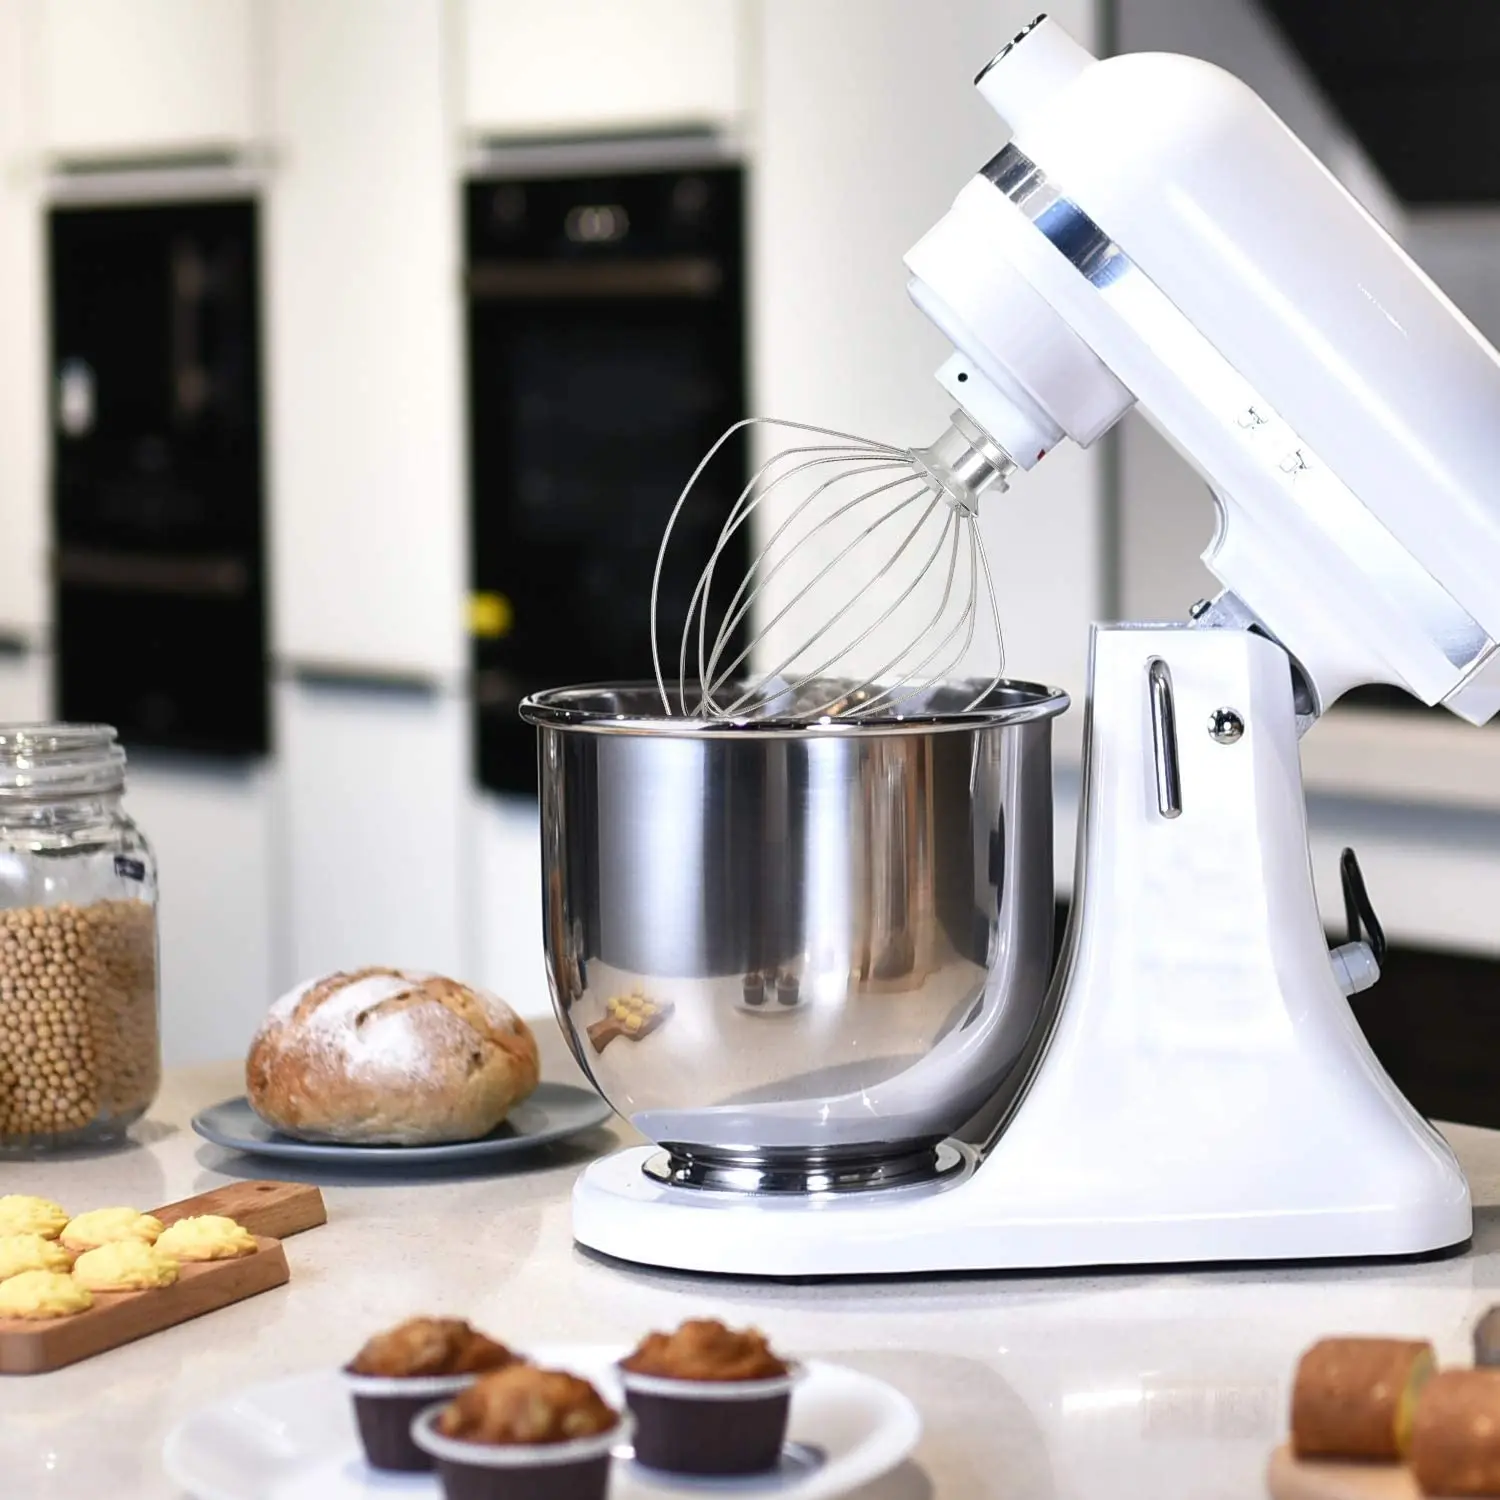 K45WW 6-Wire Whip Attachment For Tilt-Head Stand Mixer, Stainless Steel. Egg Heavy Cream Beater, Cakes Mayonnaise Whisk Mixer ac